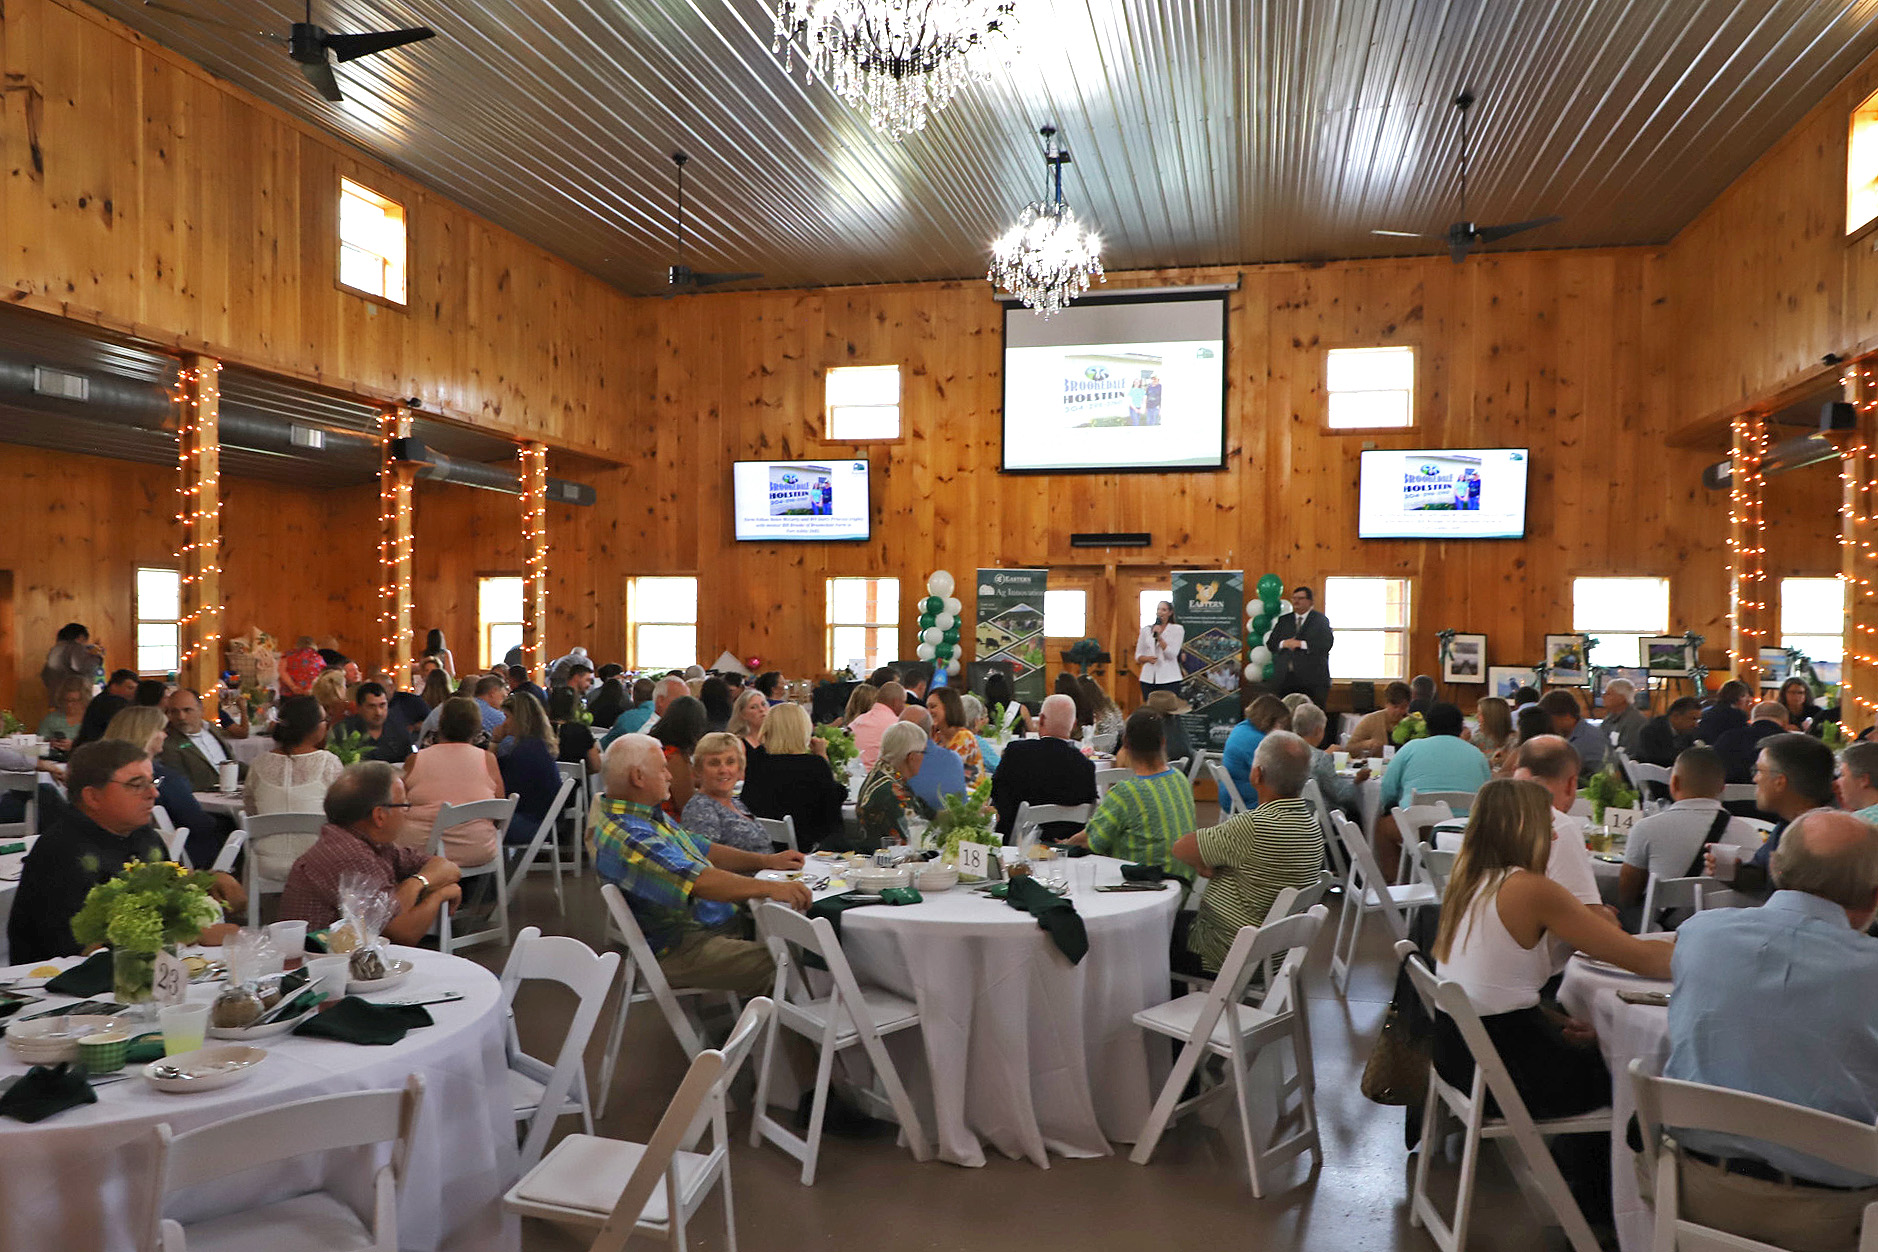 Foundation's Farm-To-Table Dinner Raises $27,000 for Students and